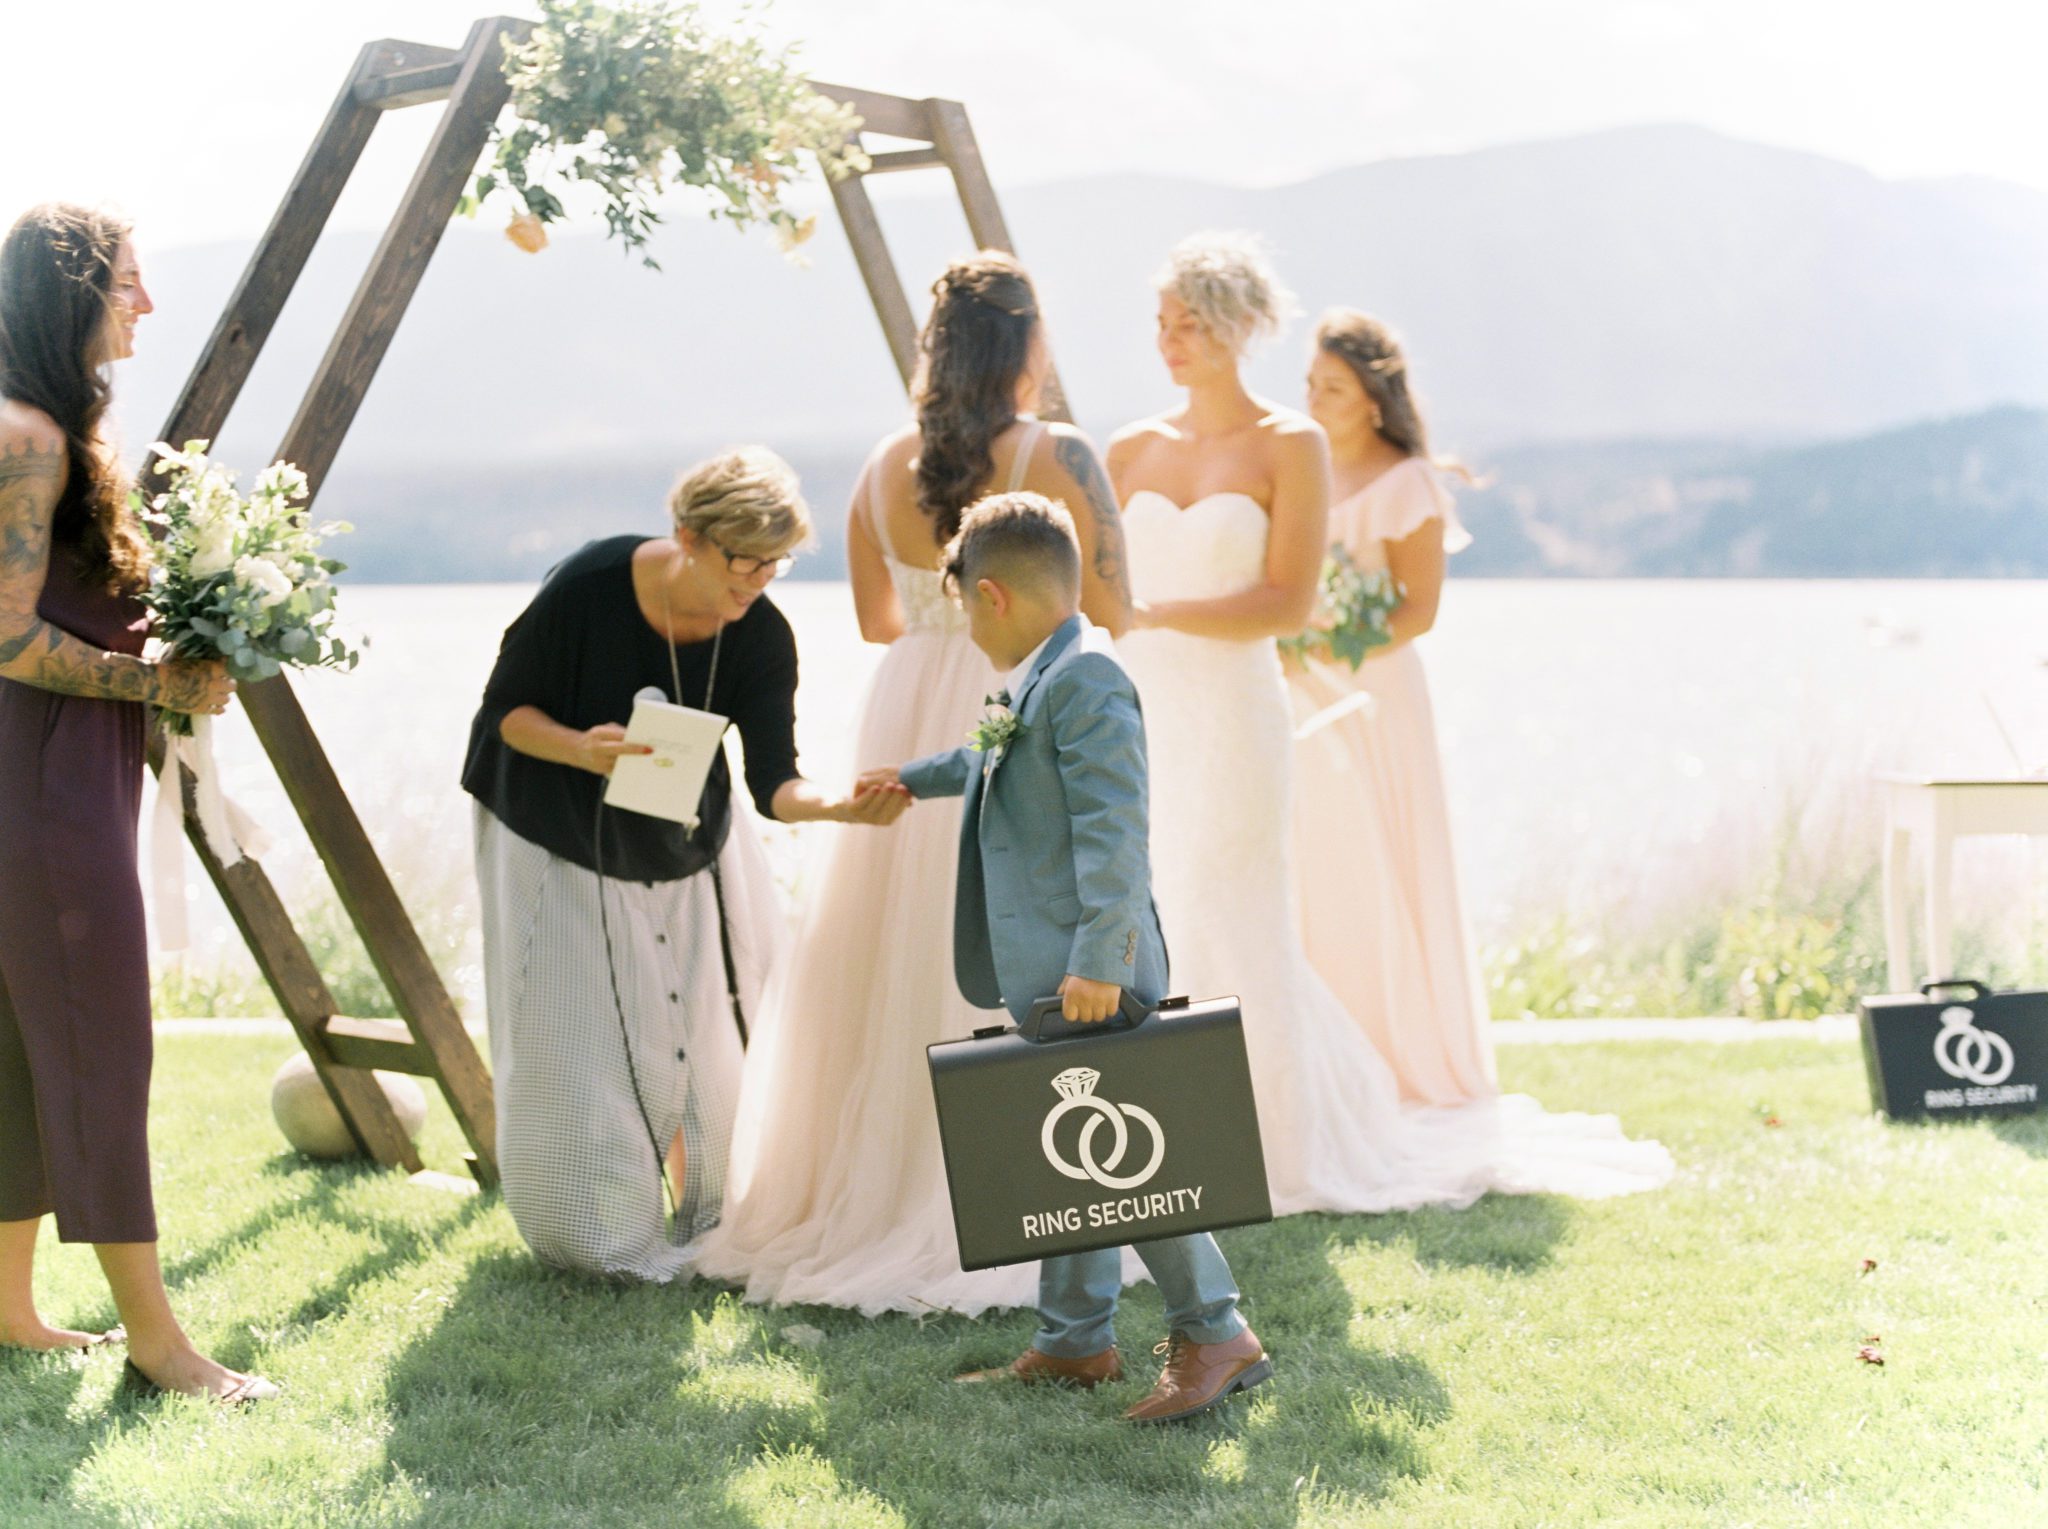 Ring Security briefcase for a ring bearer 